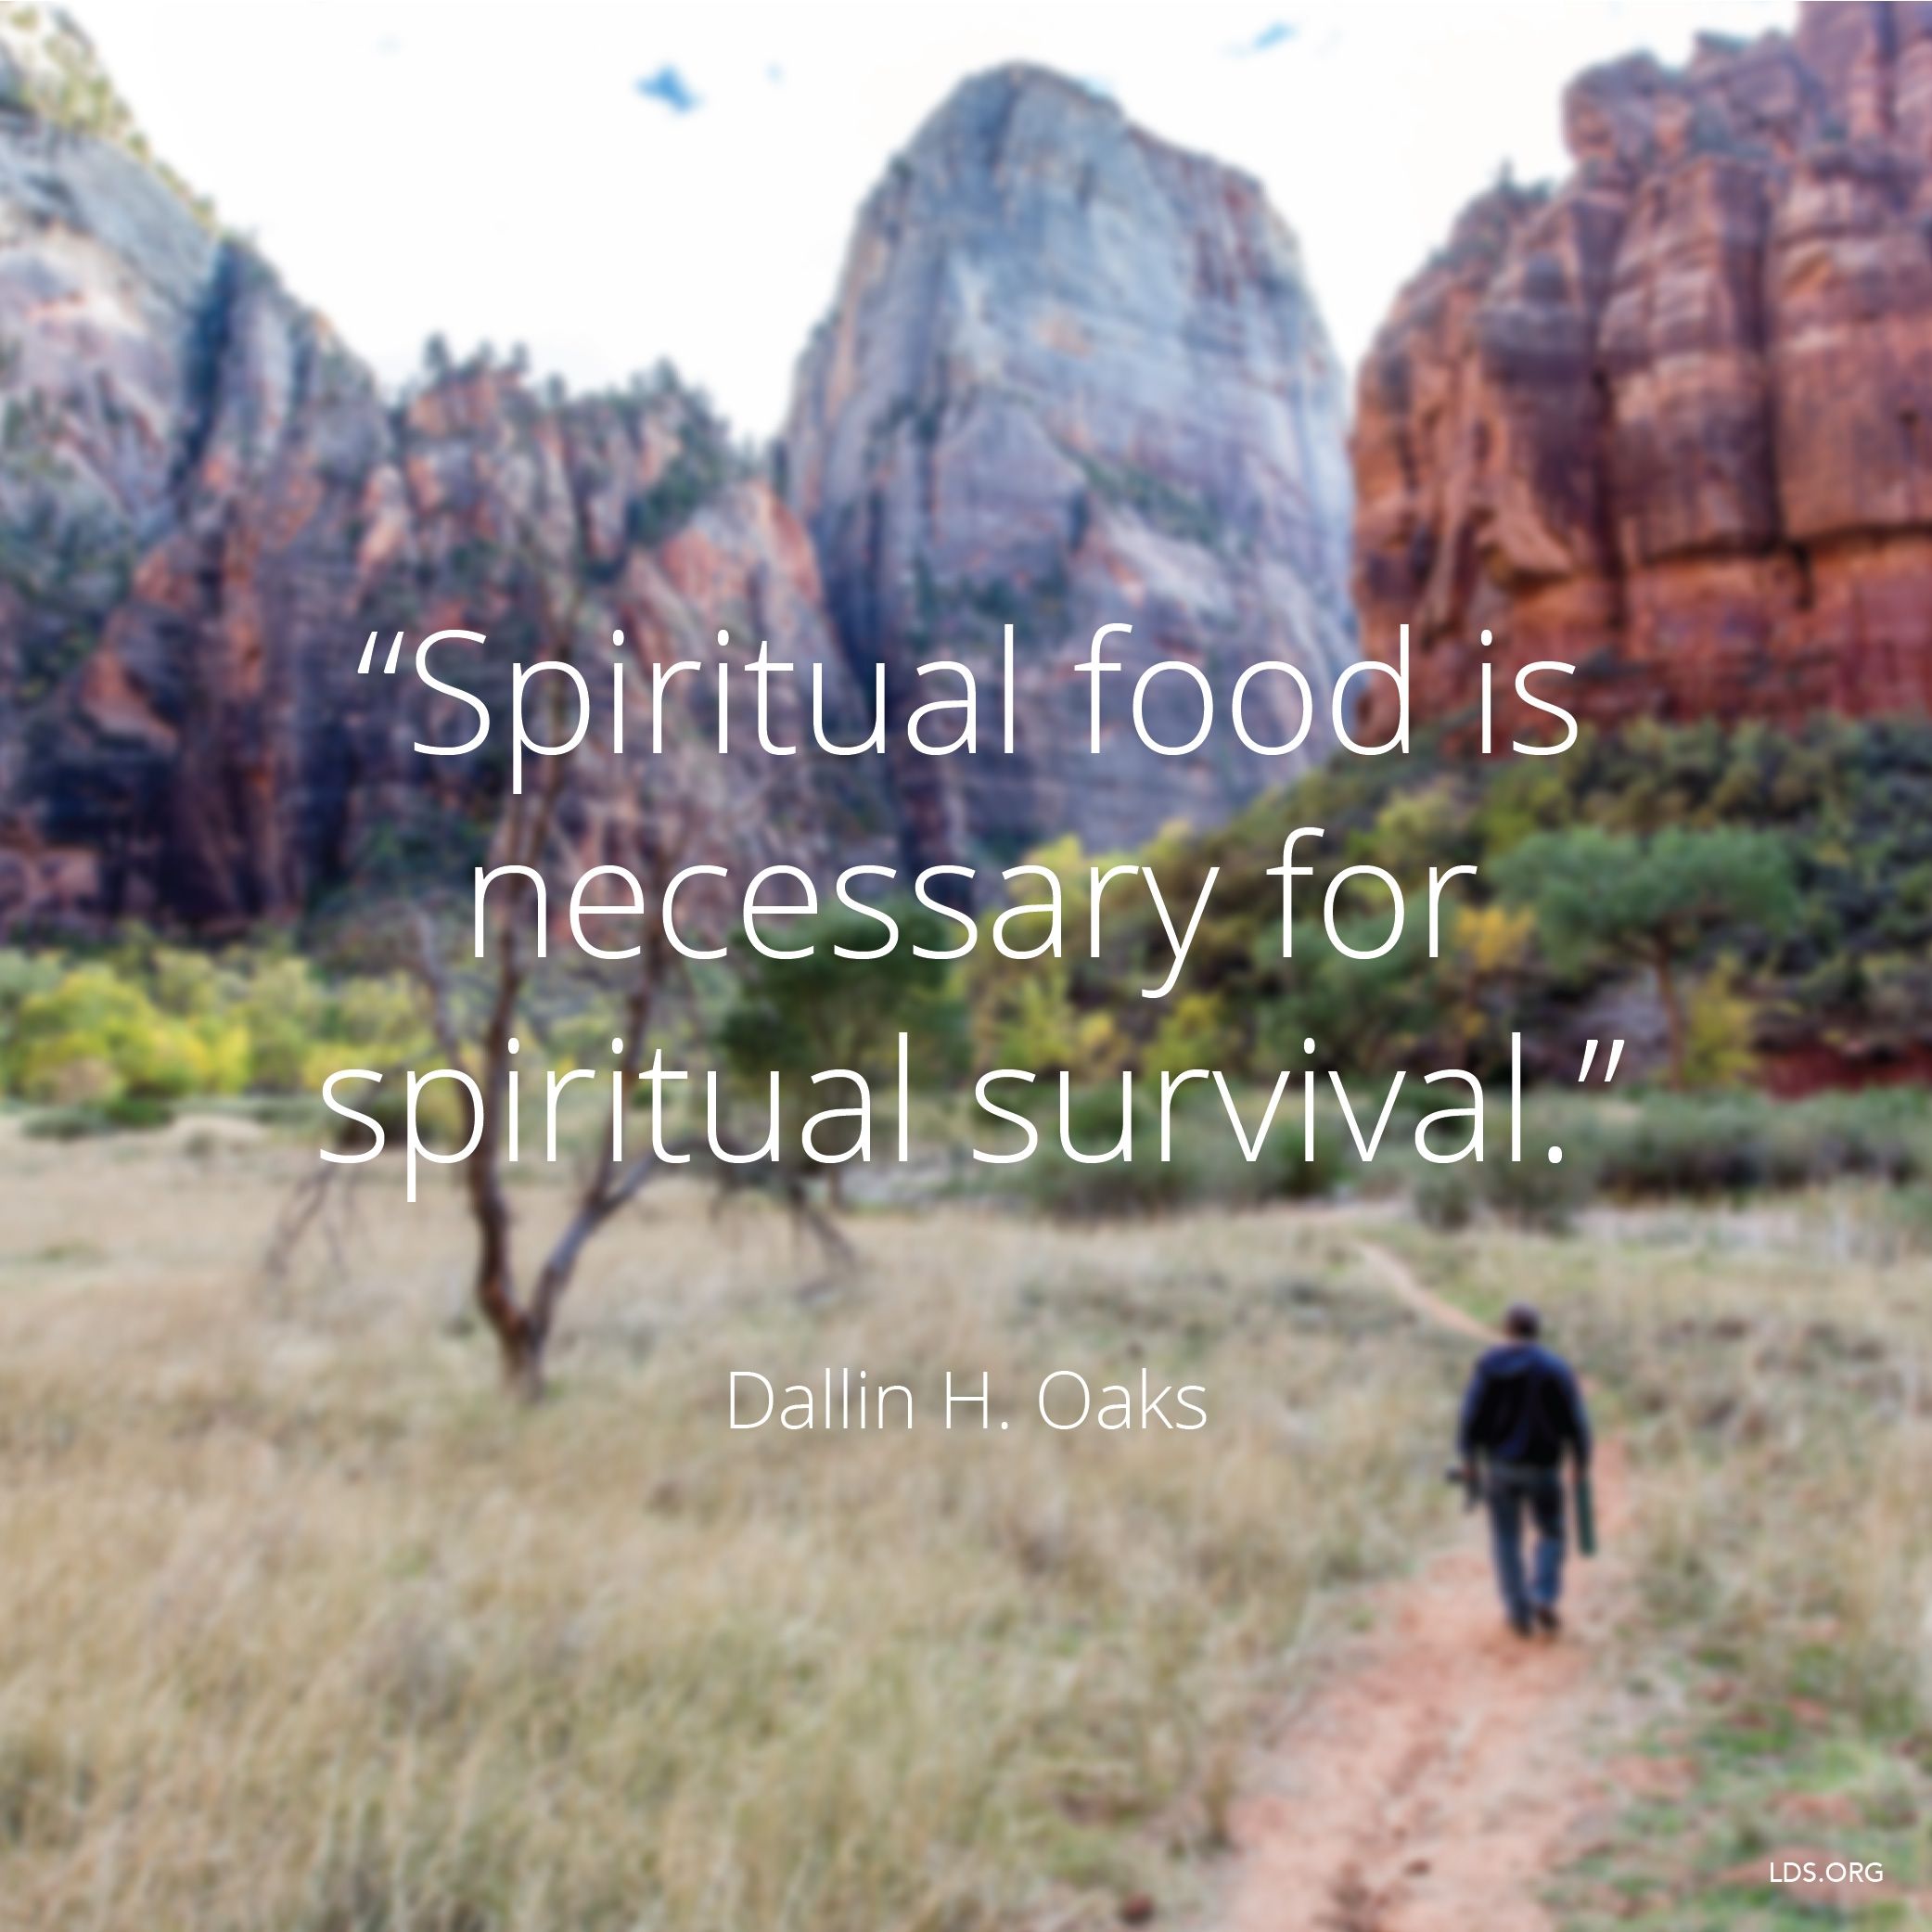 “Spiritual food is necessary for spiritual survival.”—Elder Dallin H. Oaks, “The Parable of the Sower” © undefined ipCode 1.